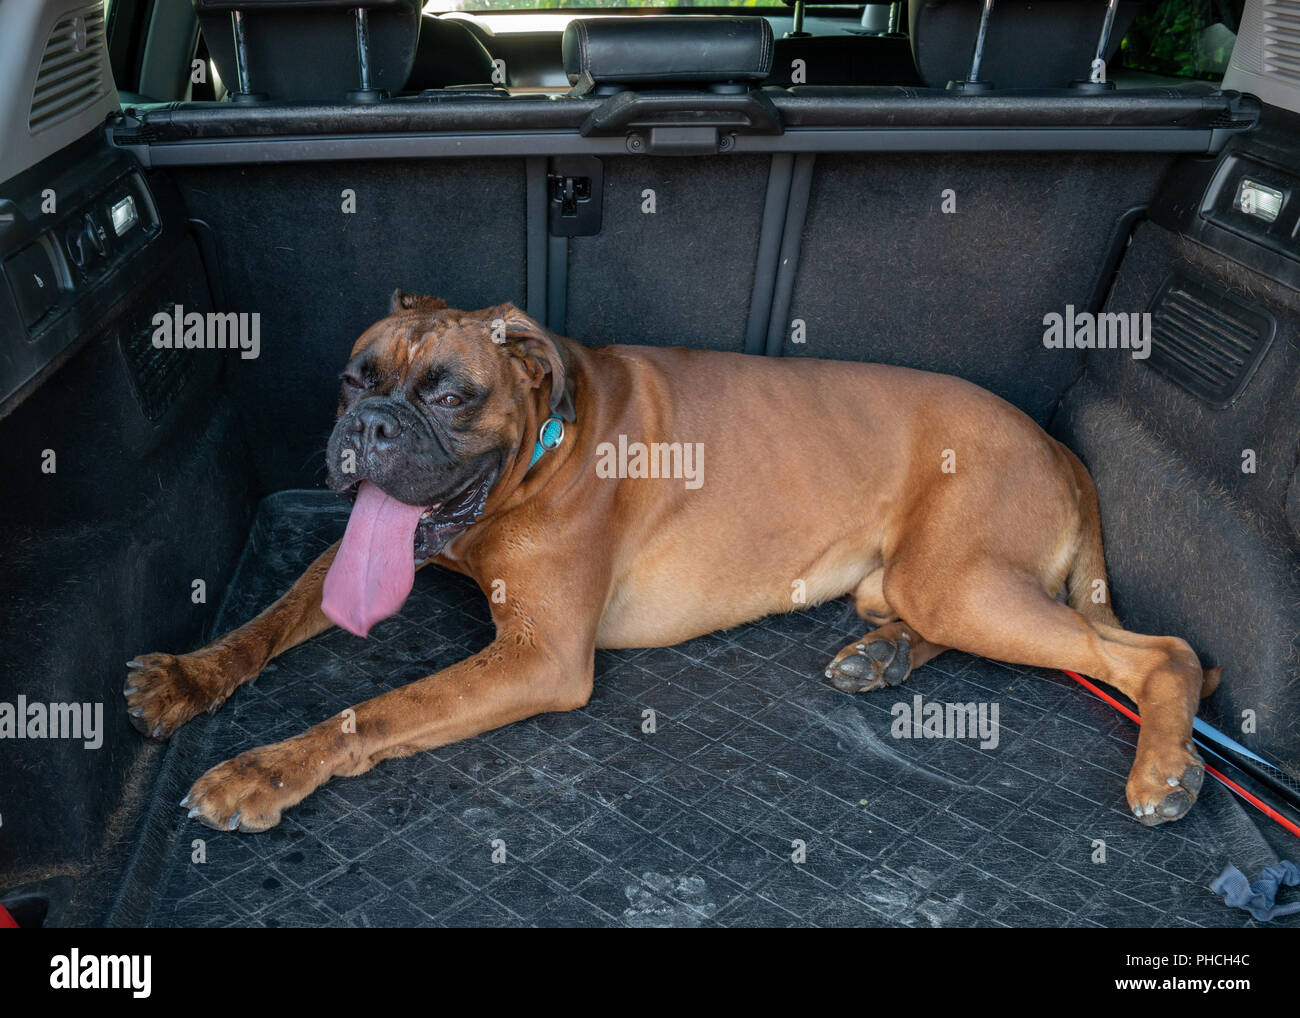 Trieste, Italy, 19 August 2018. A boxer dog (German boxer) rests in a car trunk after a training session.  Photo by Enrique Shore Stock Photo